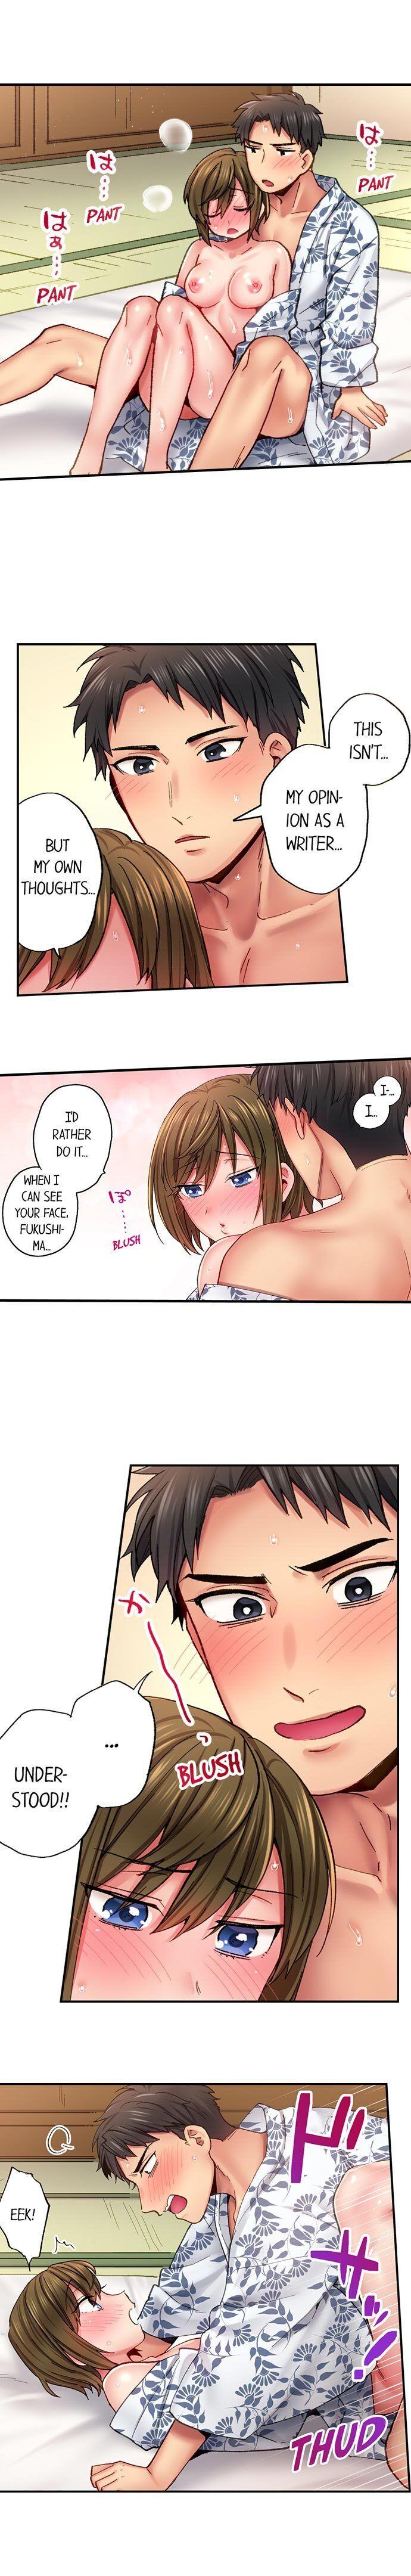 From Poker Face to Cumming Face in 90 Seconds - Chapter 18 Page 5